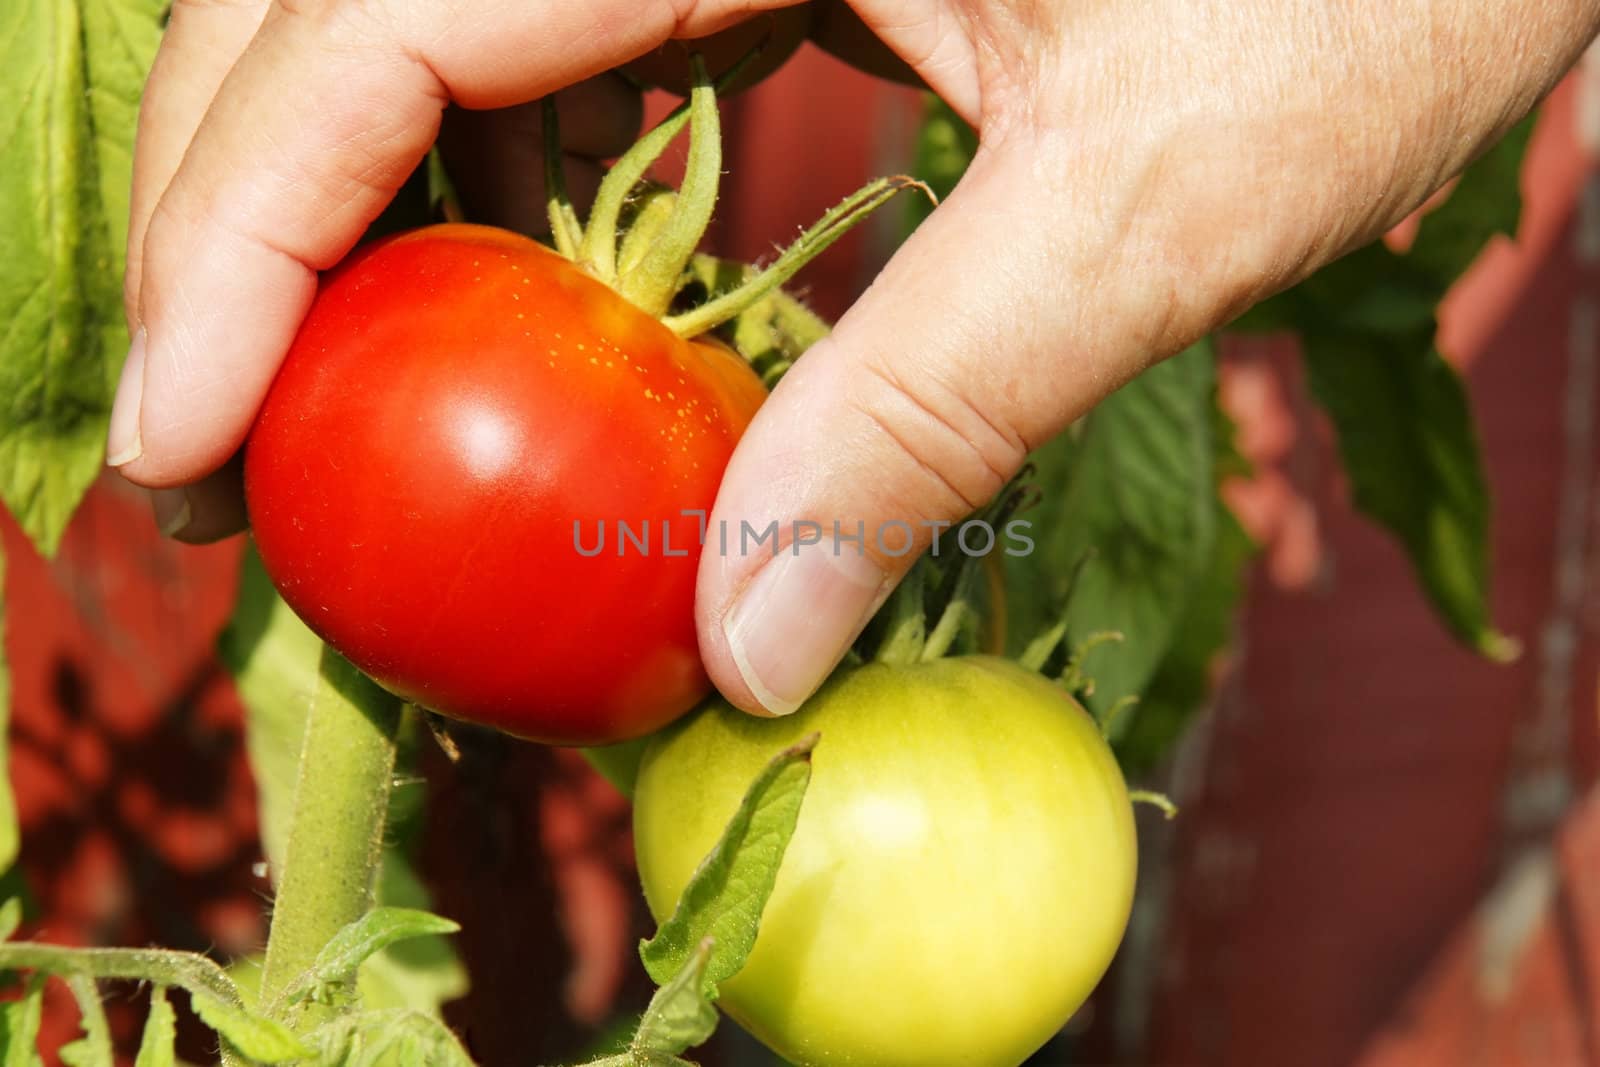 Person picking up delicious bright red tomato on a beautiful sunny day. Ripeness of the red tomato contrasted by a green one just next to it. 